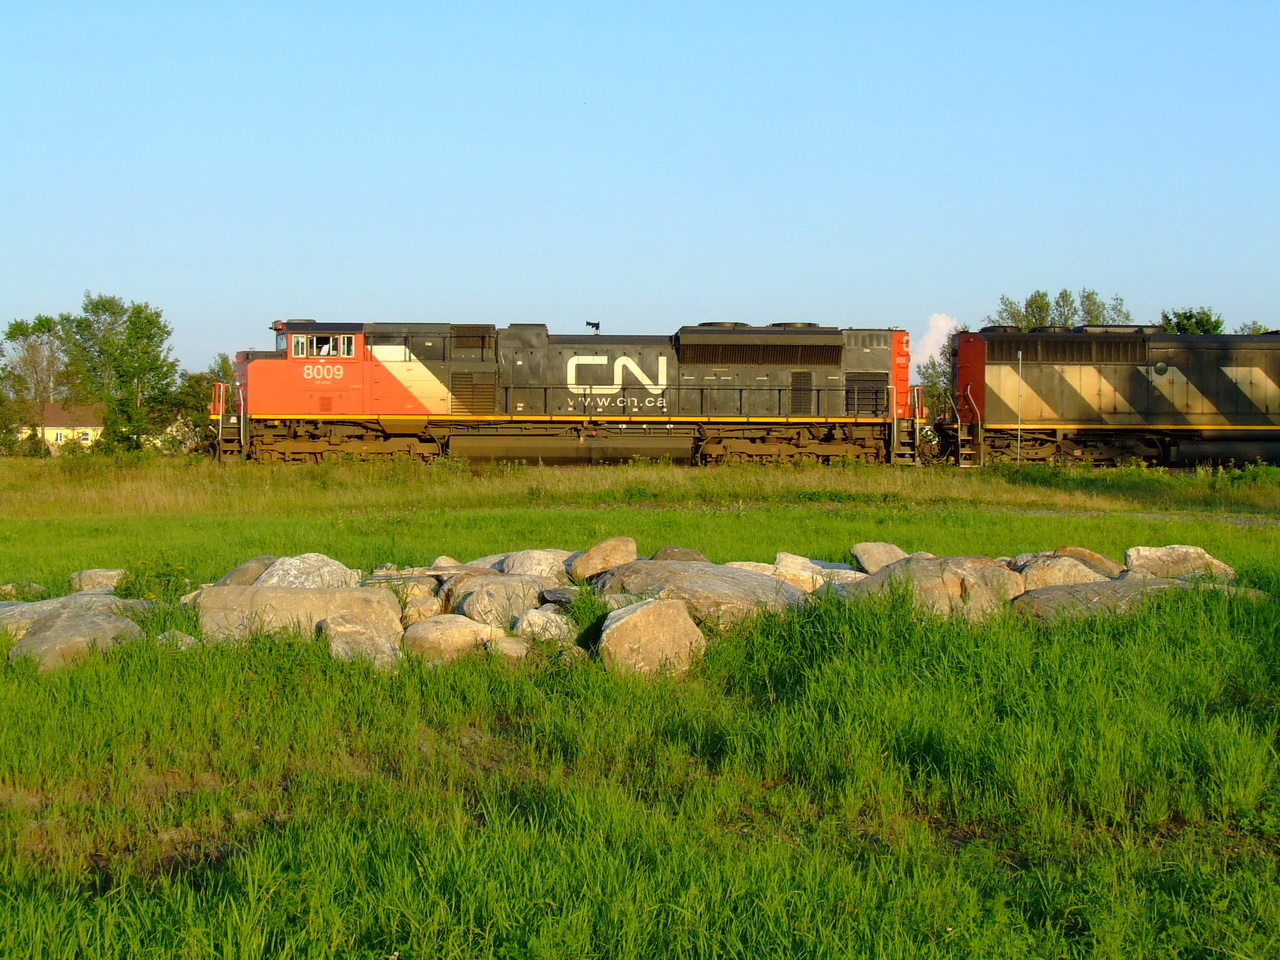 CN 400 crawls slowly on the siding to meet the very long 121.